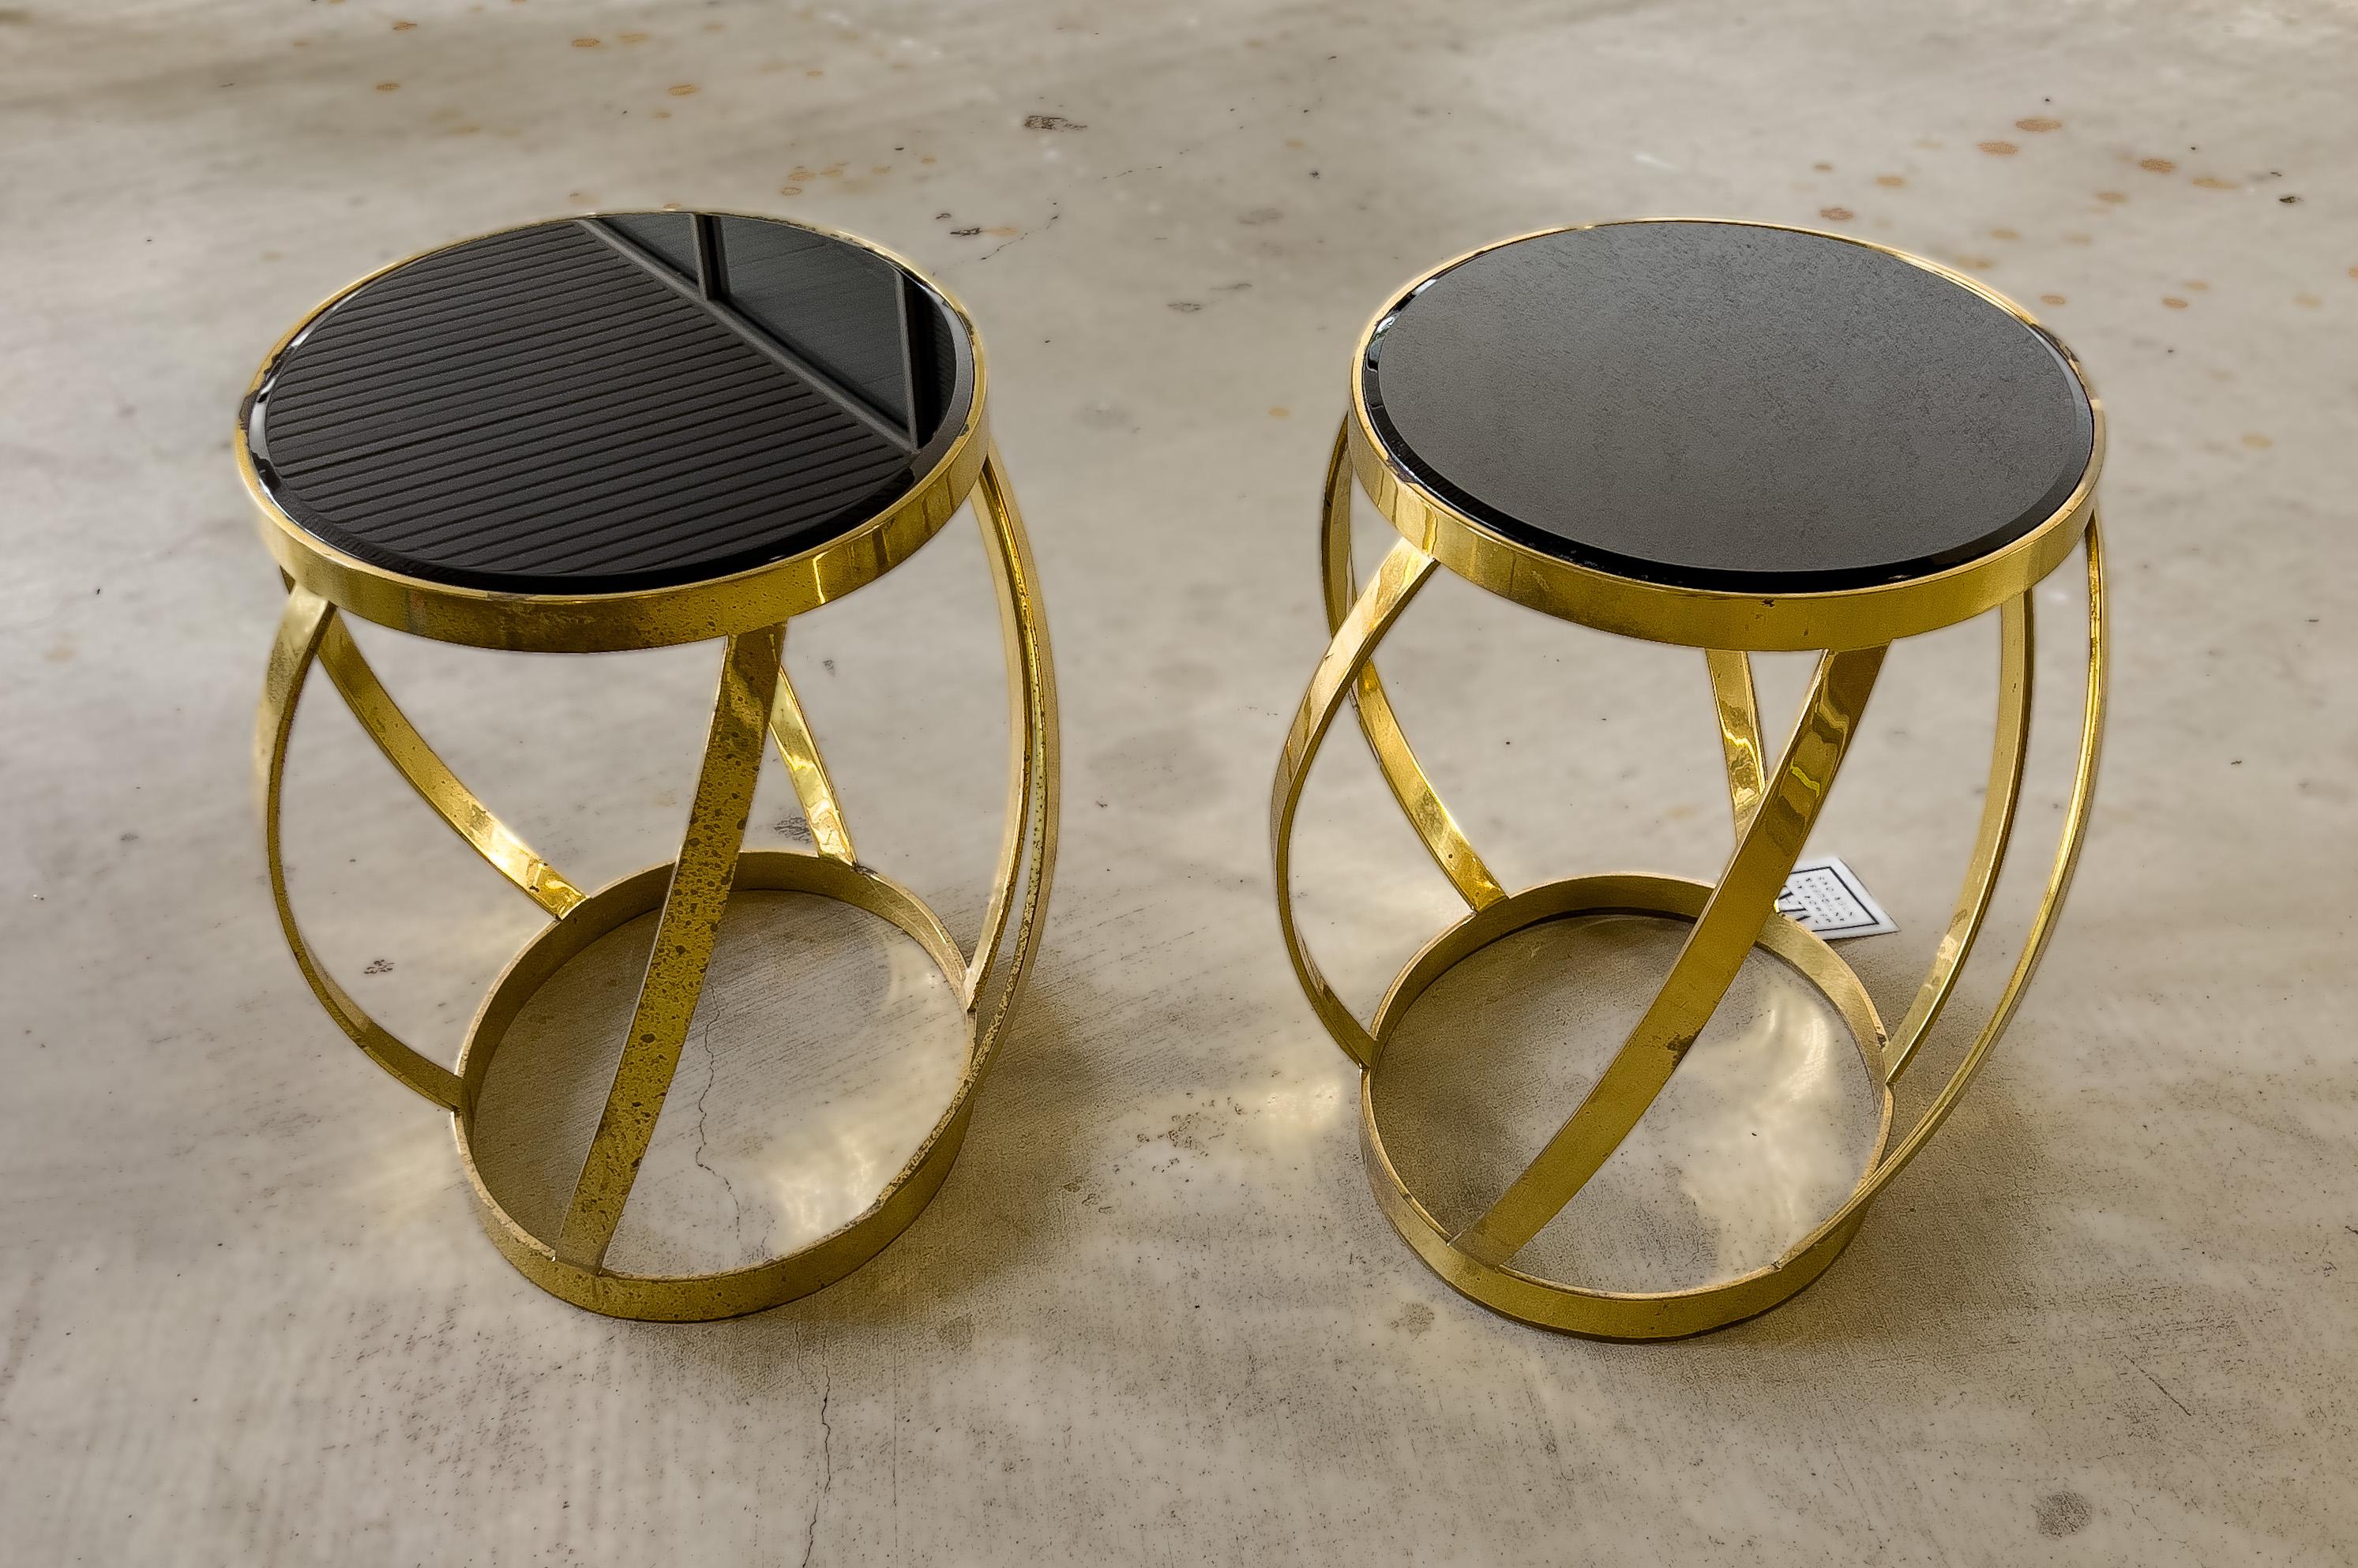 Pair of oval onyx and brass side tables by Karl Springer. Heavy brass table with an onyx beveled top.